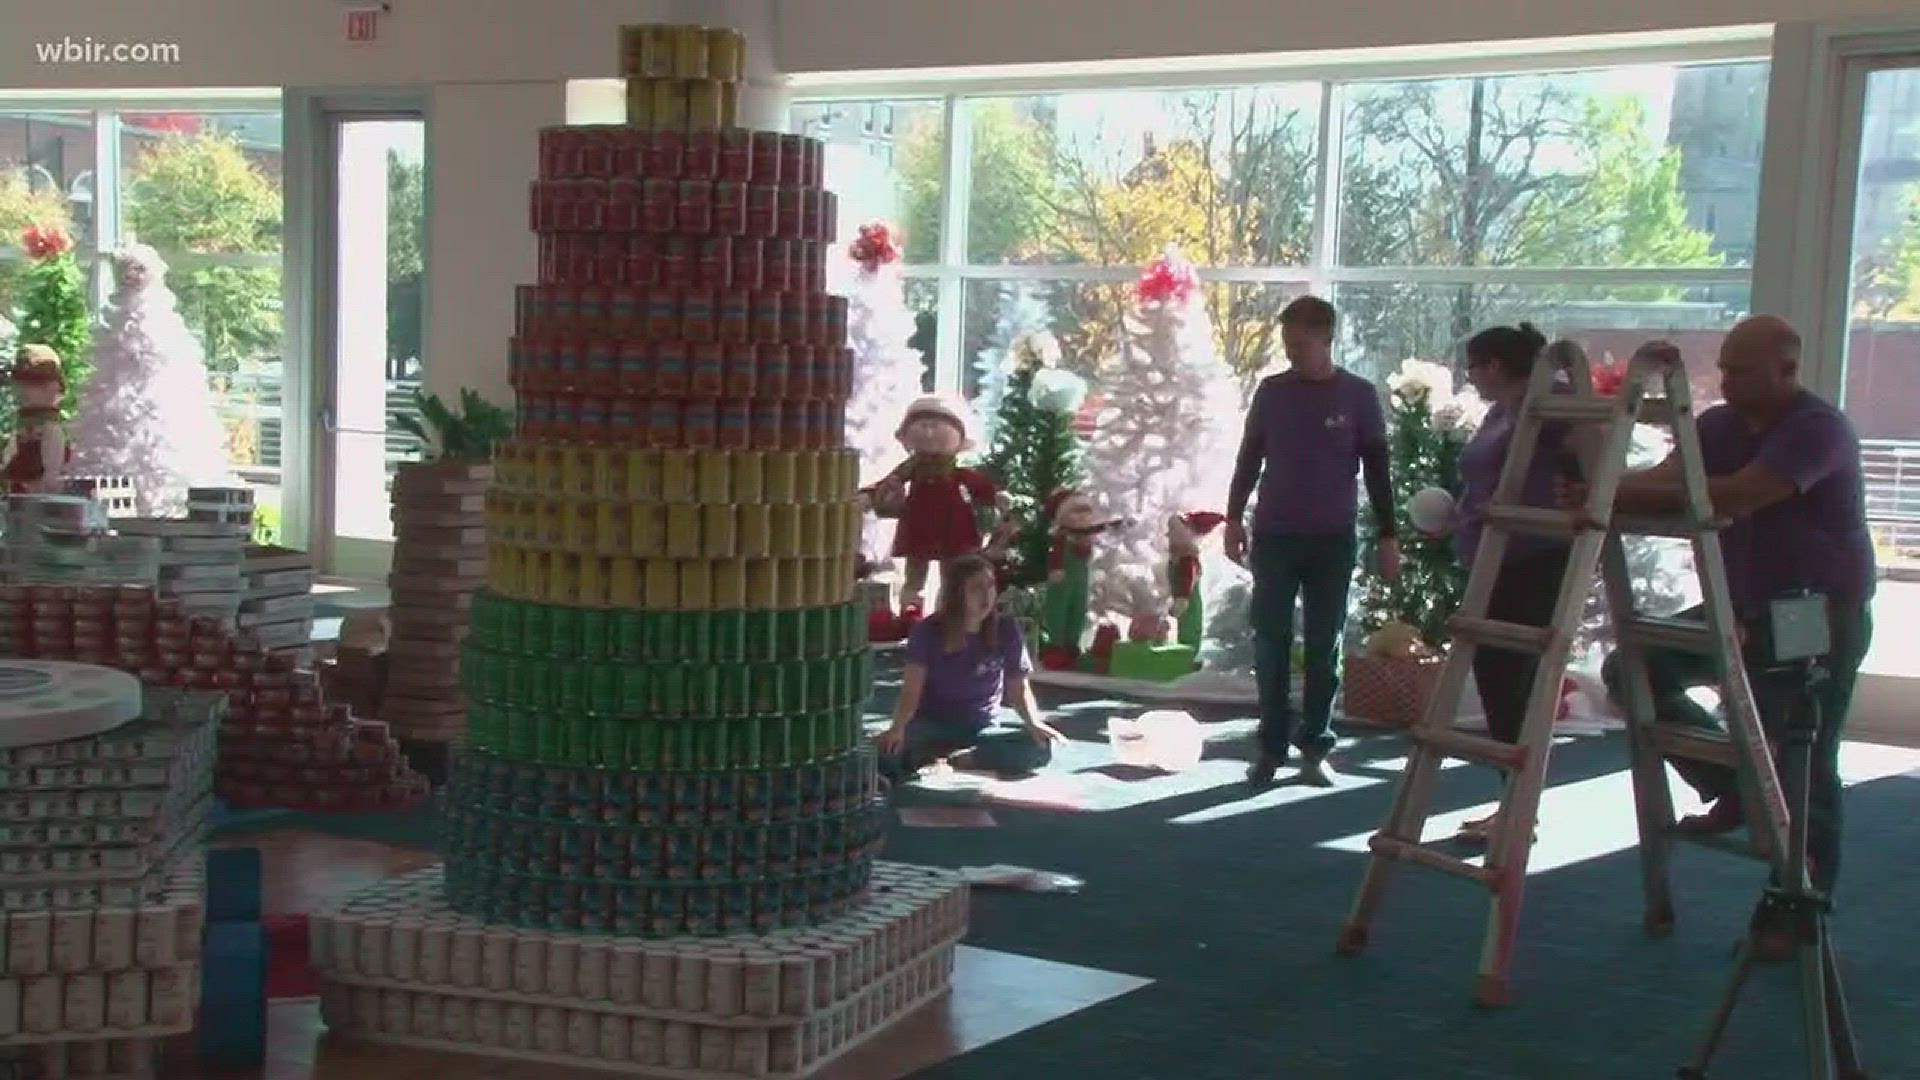 Nov. 20, 2017: The fifth annual Canstruction competition is underway, benefiting Second Harvest Food Bank of East Tennessee.